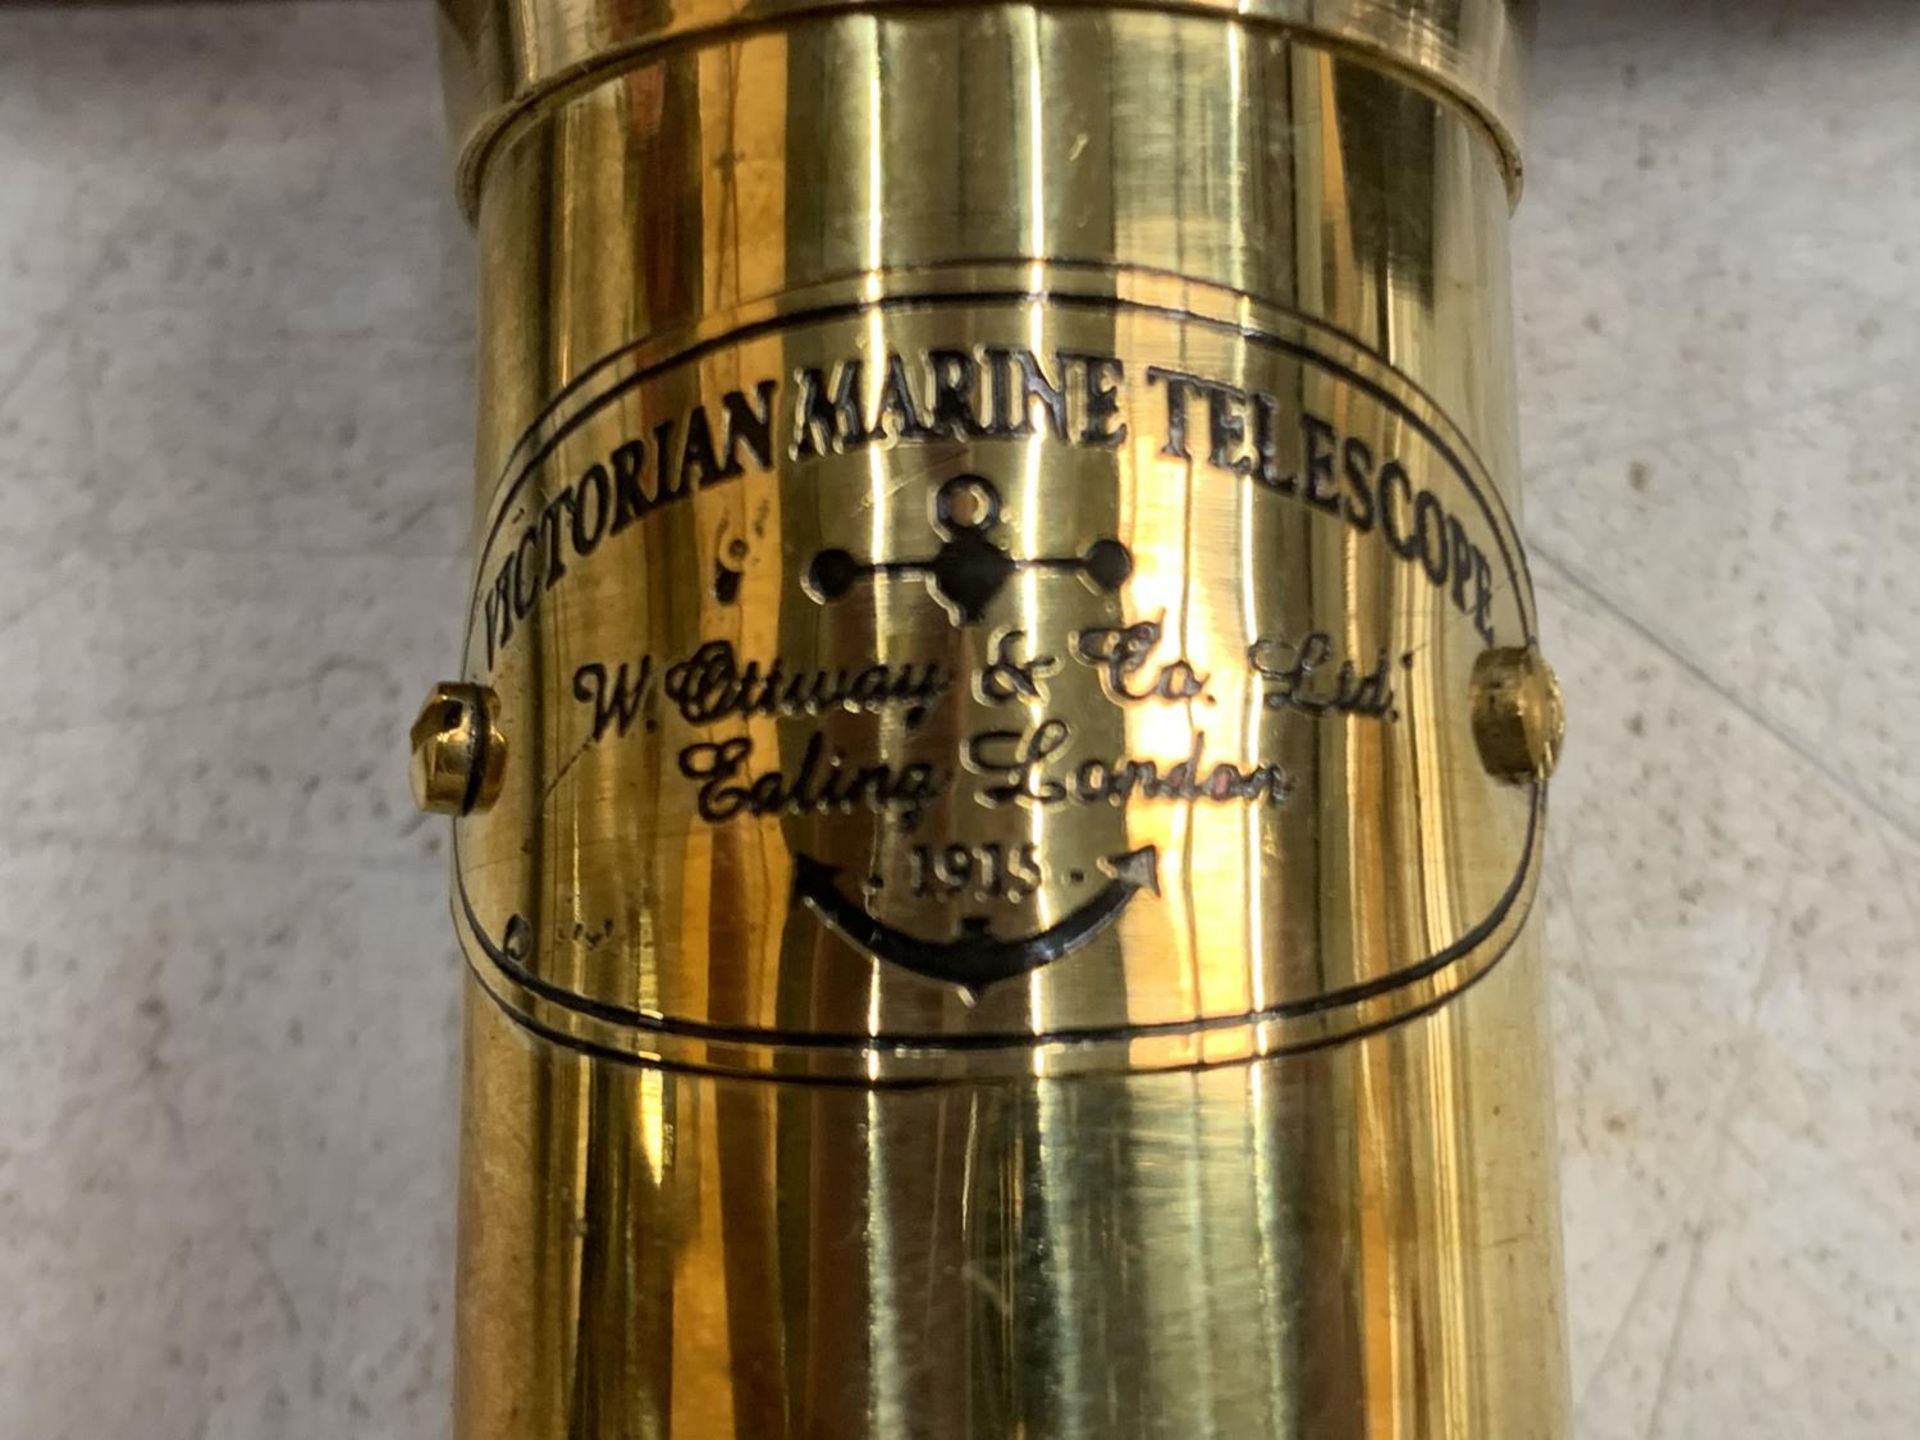 A BOXED BRASS VICTORIAN MARINE TELESCOPE - Image 4 of 4